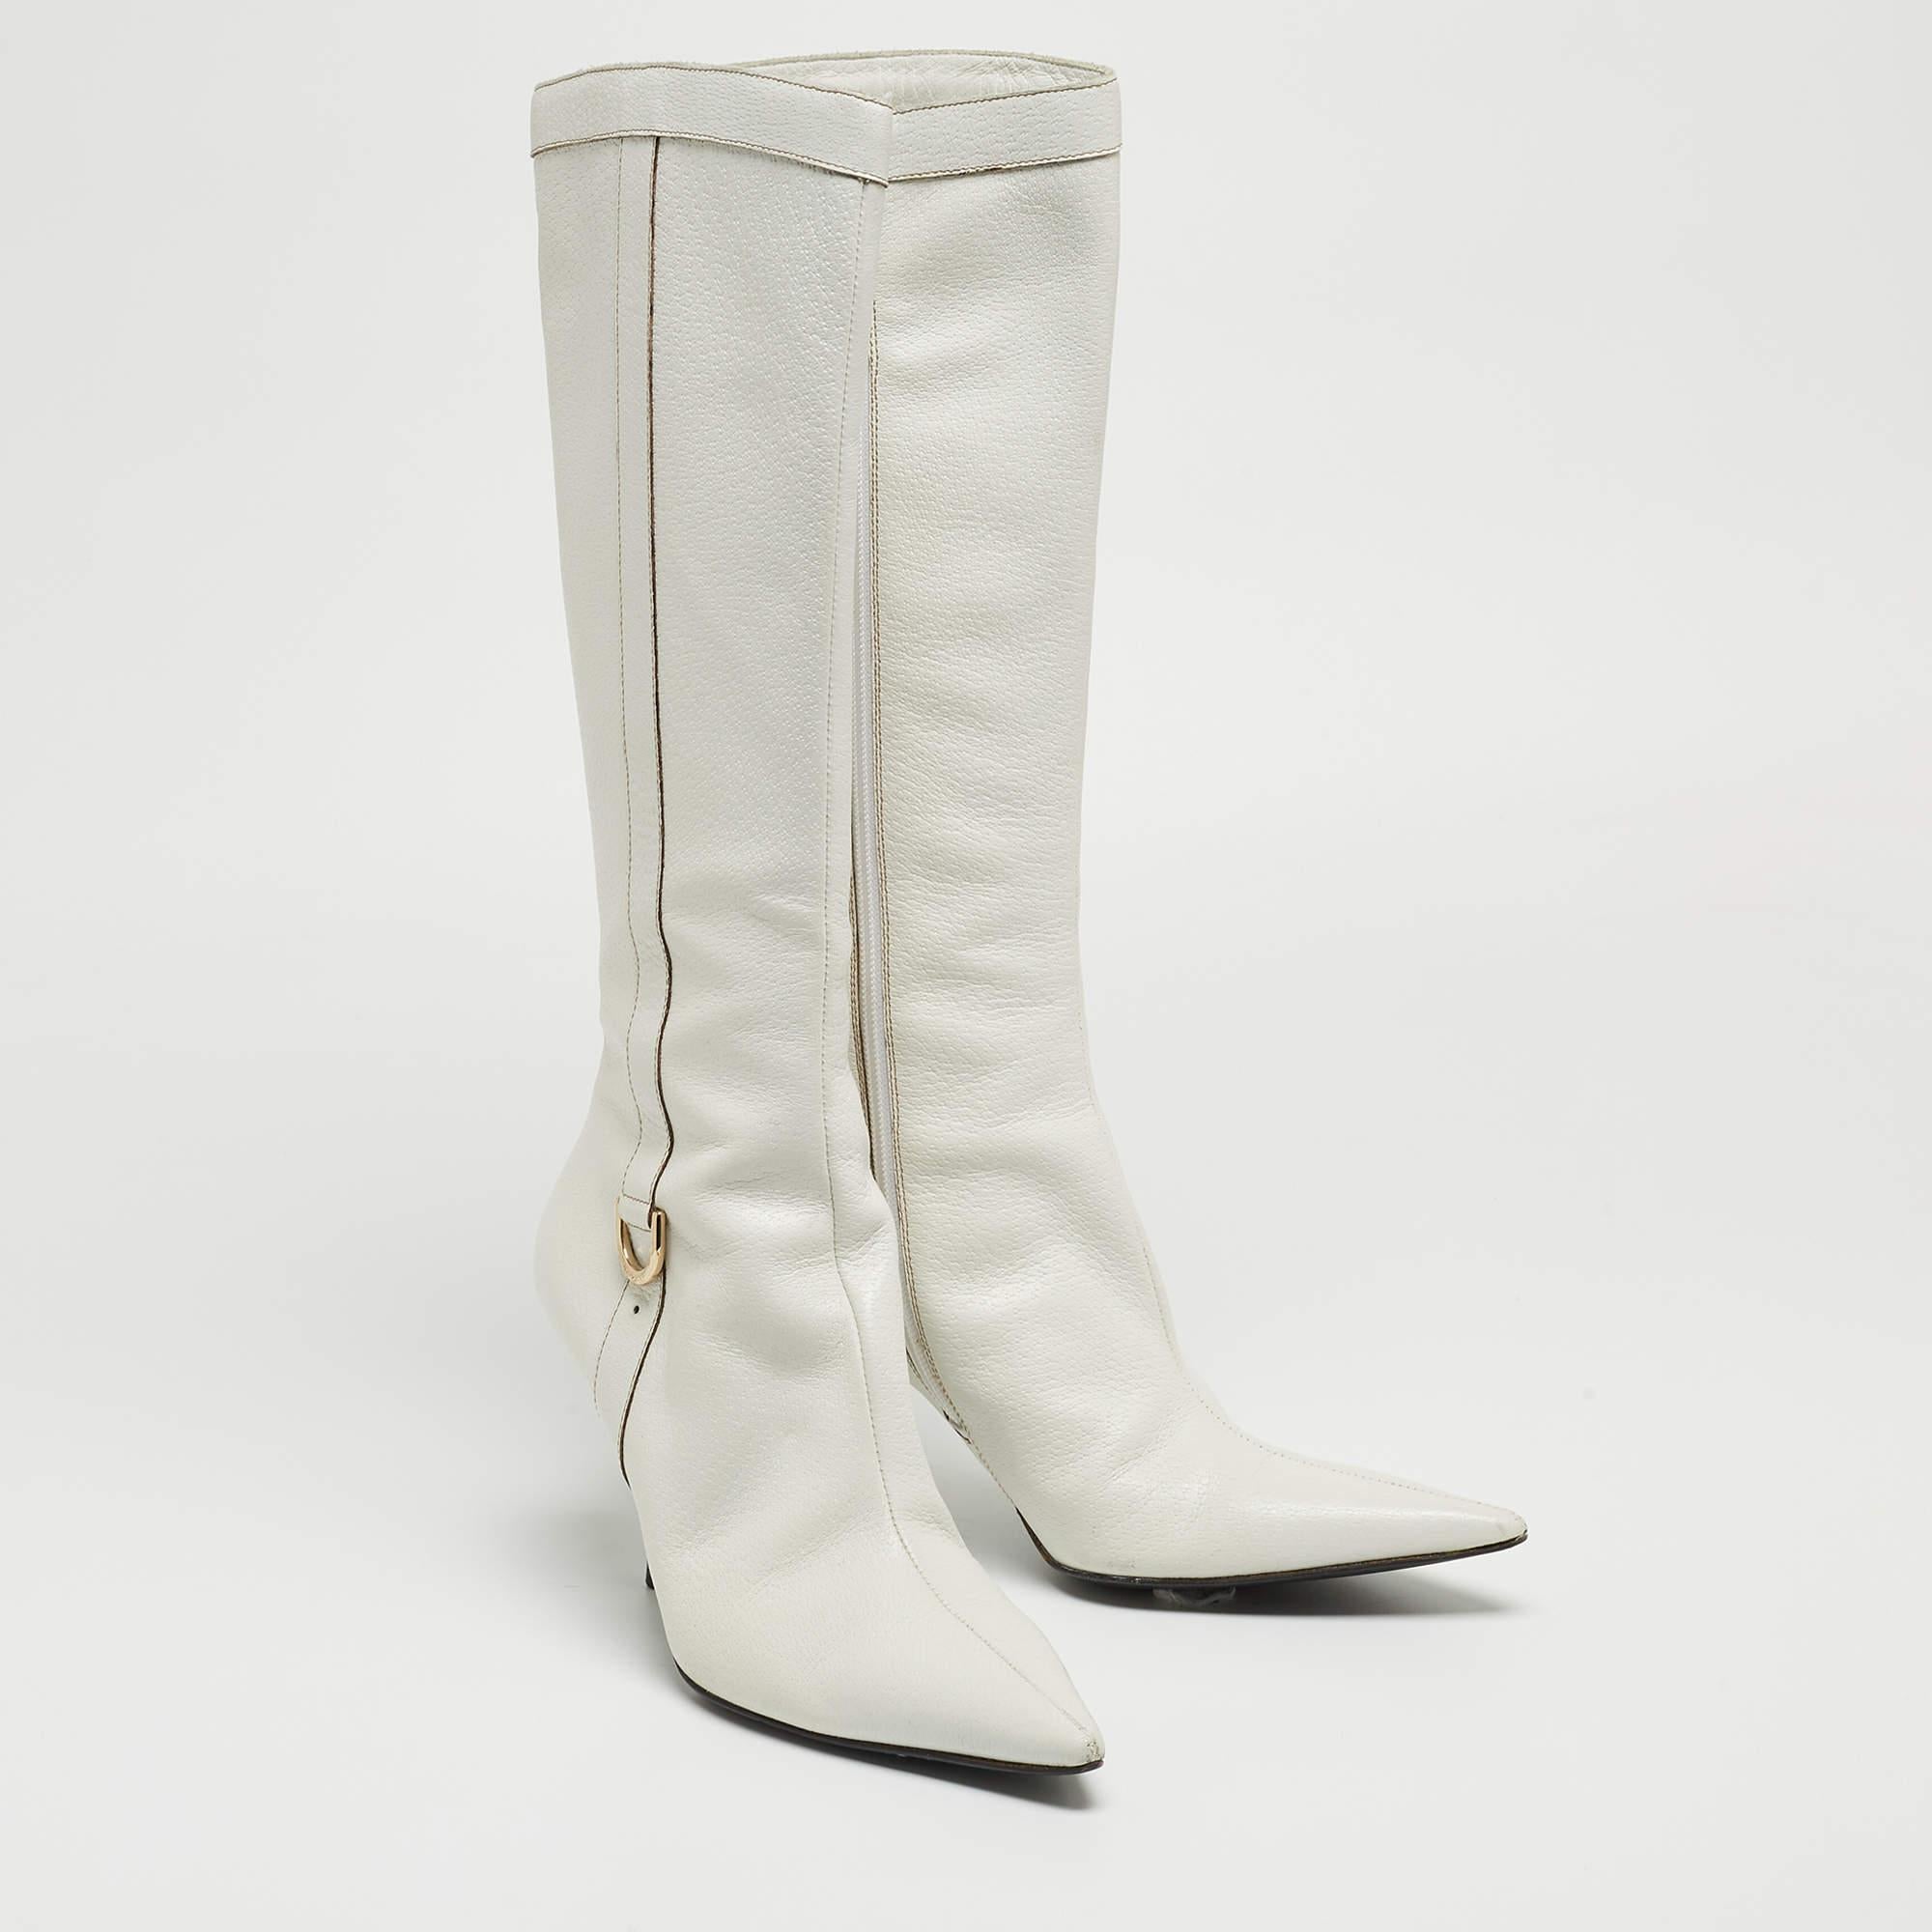 Gucci White Leather Pointed Toe Knee Length Boots Size 41 In Good Condition For Sale In Dubai, Al Qouz 2